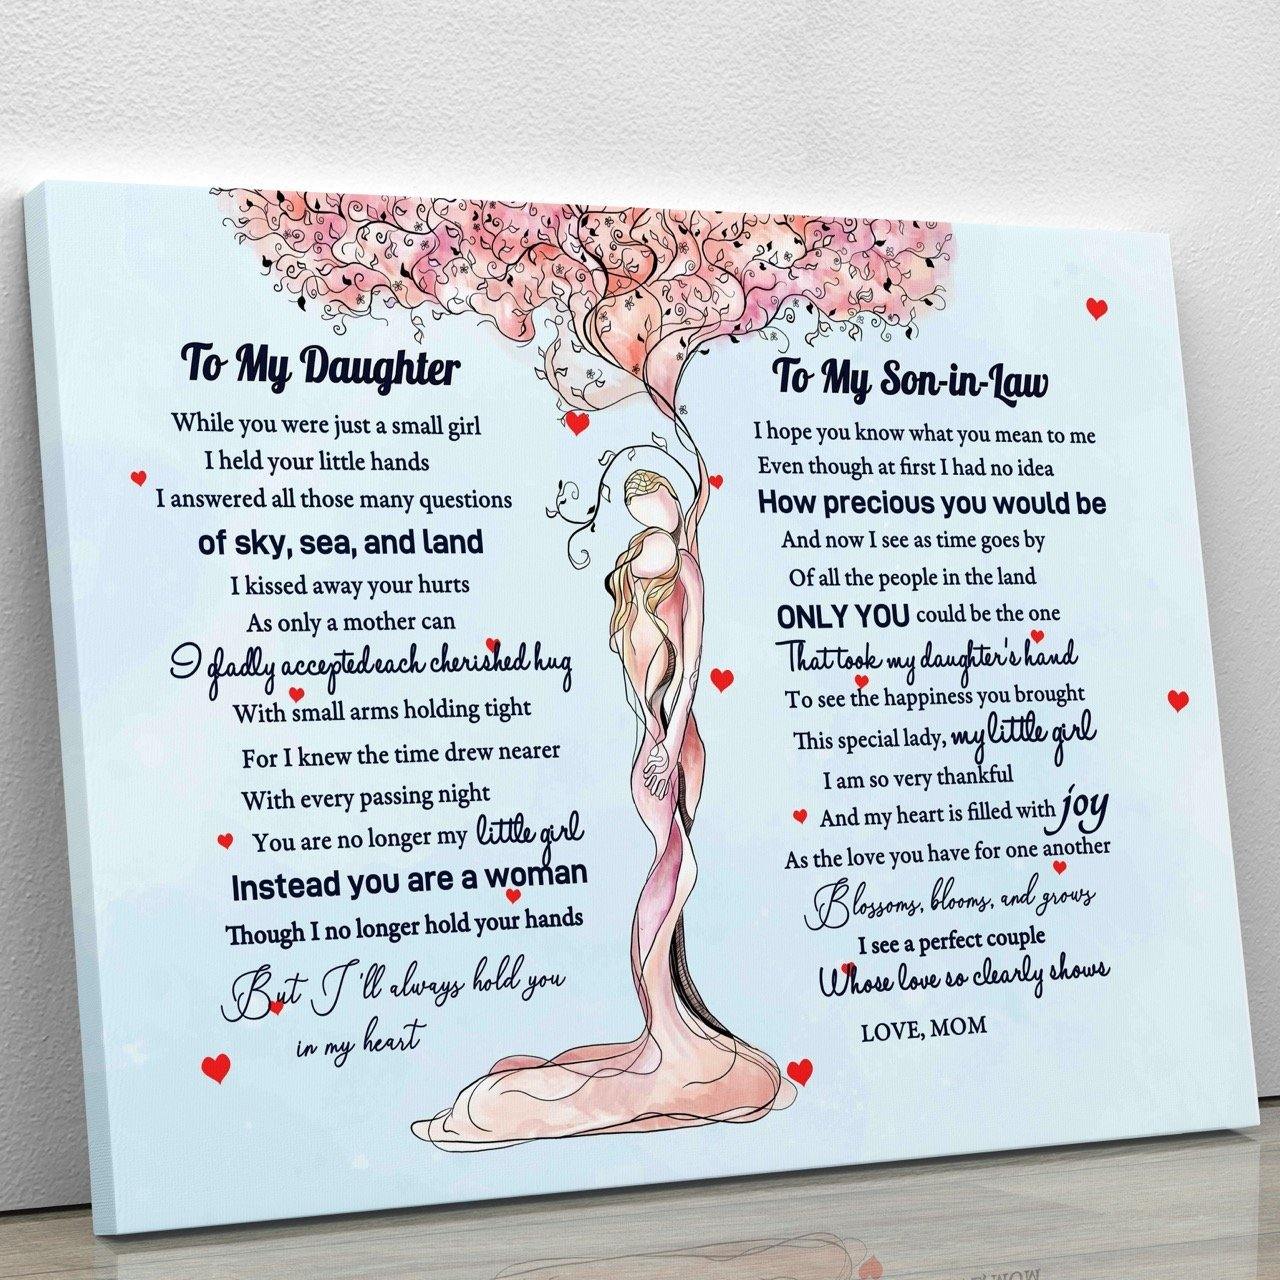 To My Daughter & Son-in-law - From Mom - Framed Canvas Gift MD035 - DivesArt LLC